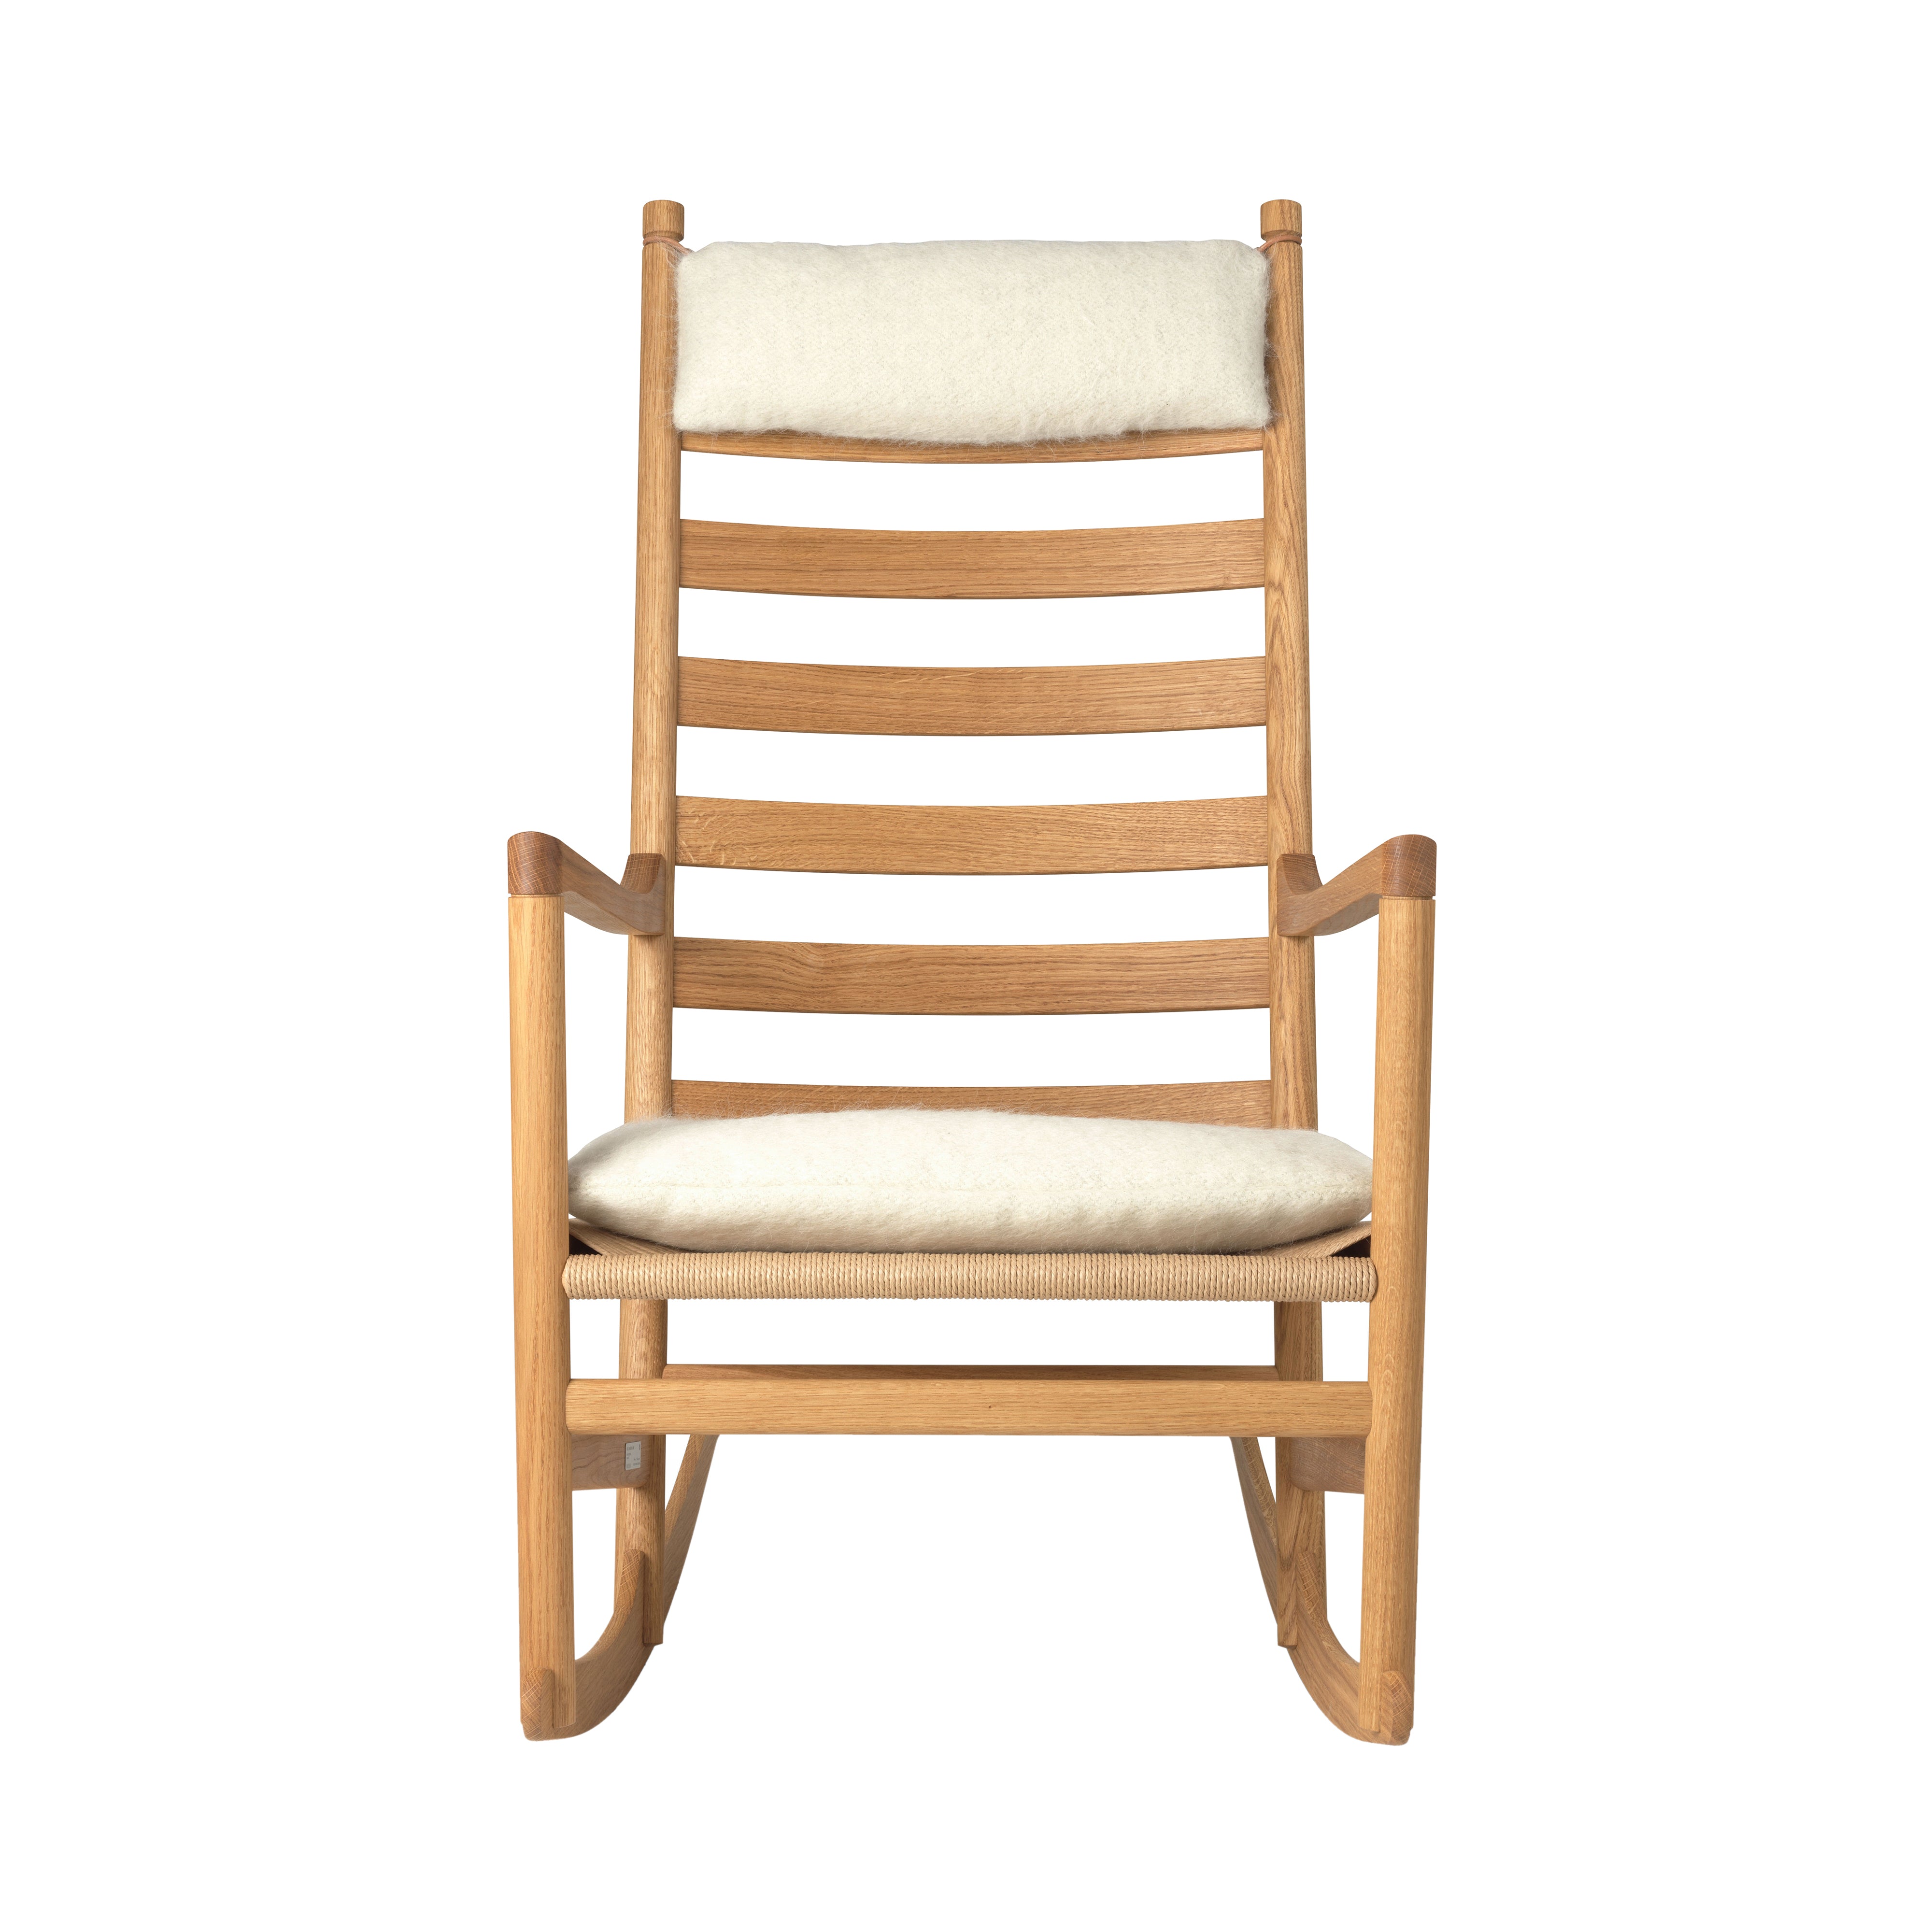 CH45 Rocking Chair with Cushion: Natural Paper Cord + Oiled Oak